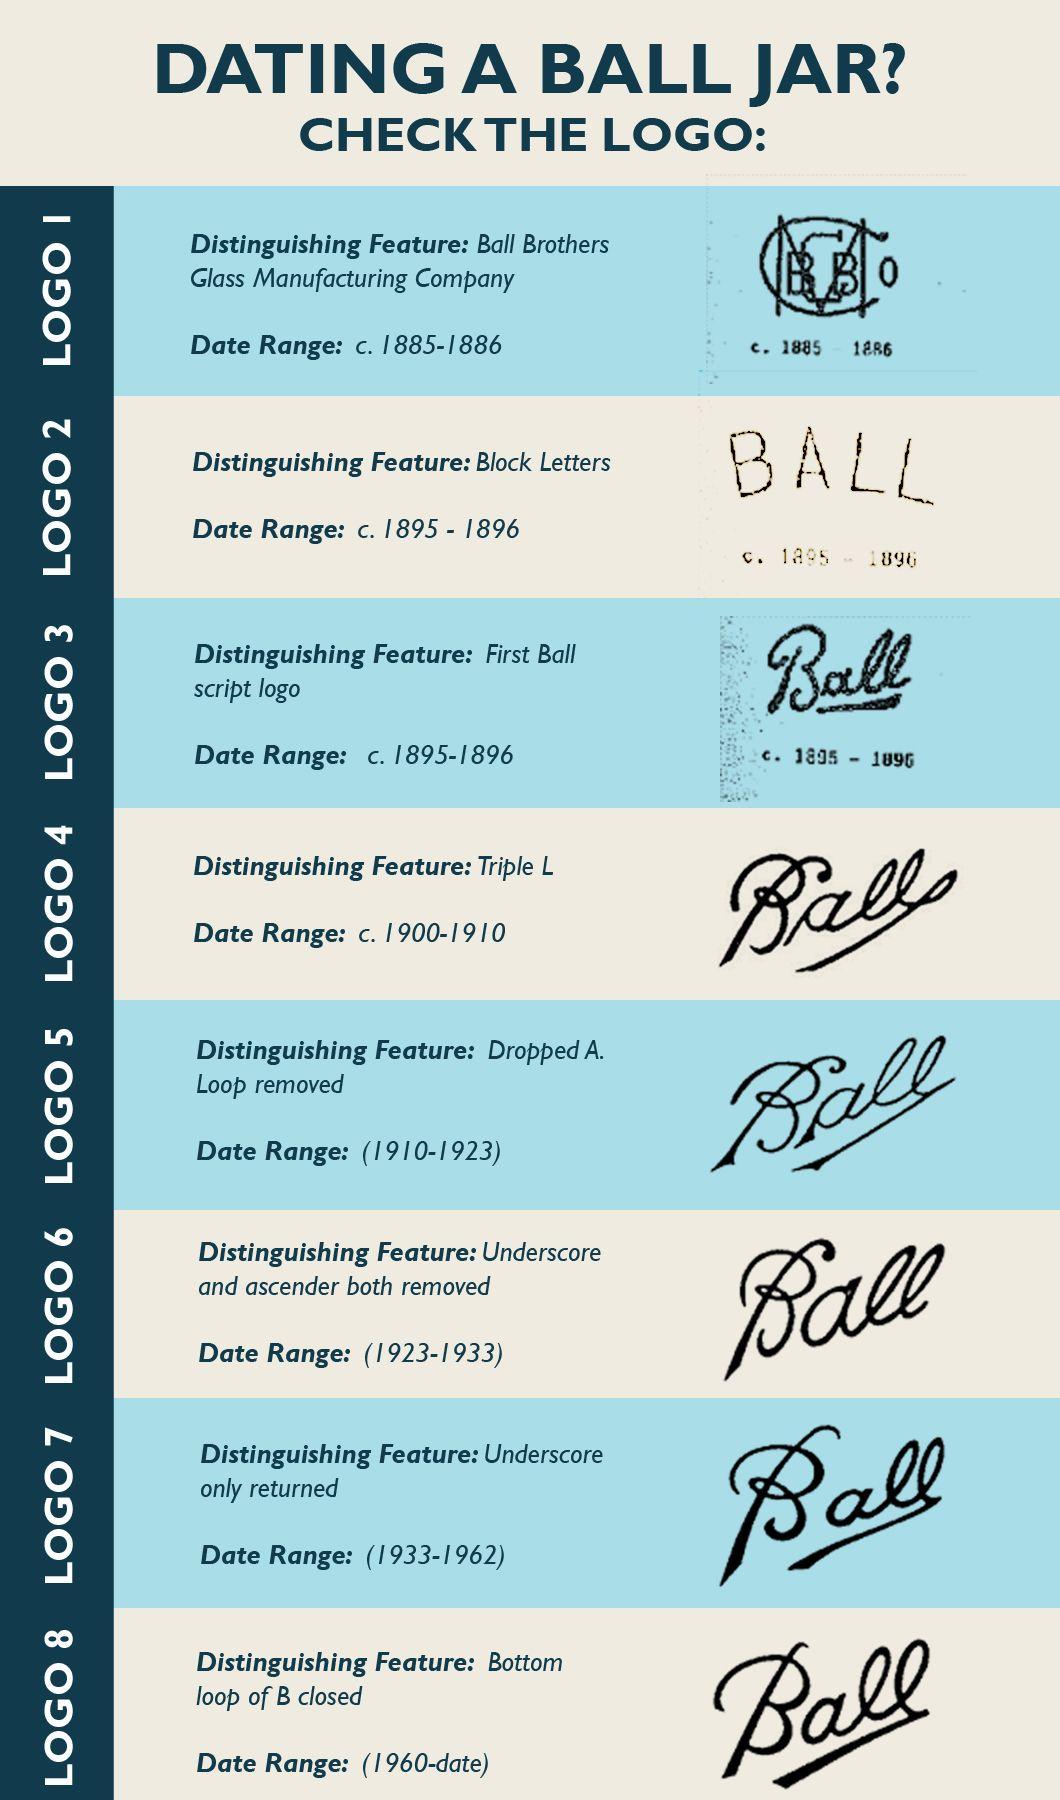 Blue Ball with Company Logo - How to Date a Ball Jar - Minnetrista